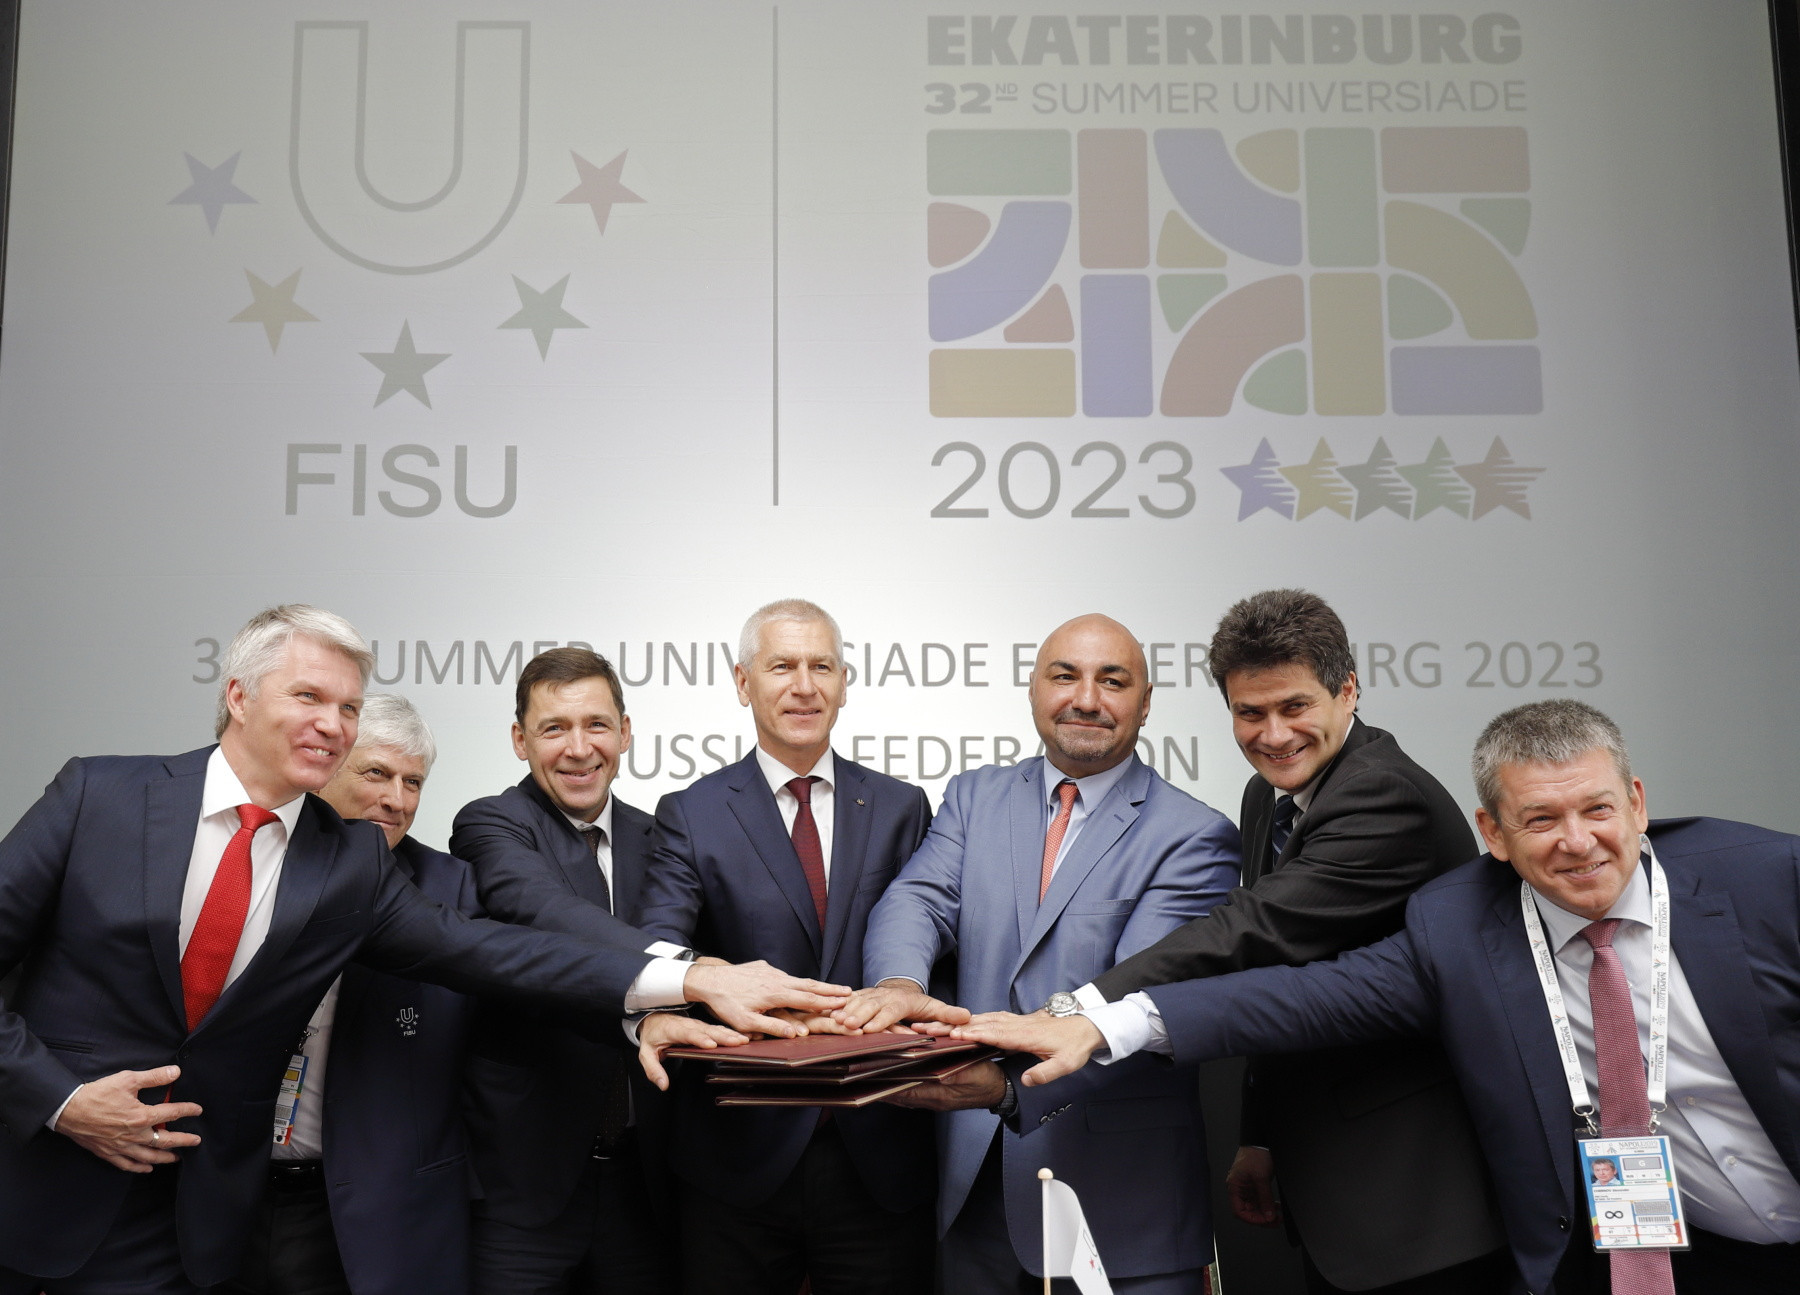 Yekaterinburg was chosen as the host for the 2023 Games by FISU last year ©FISU